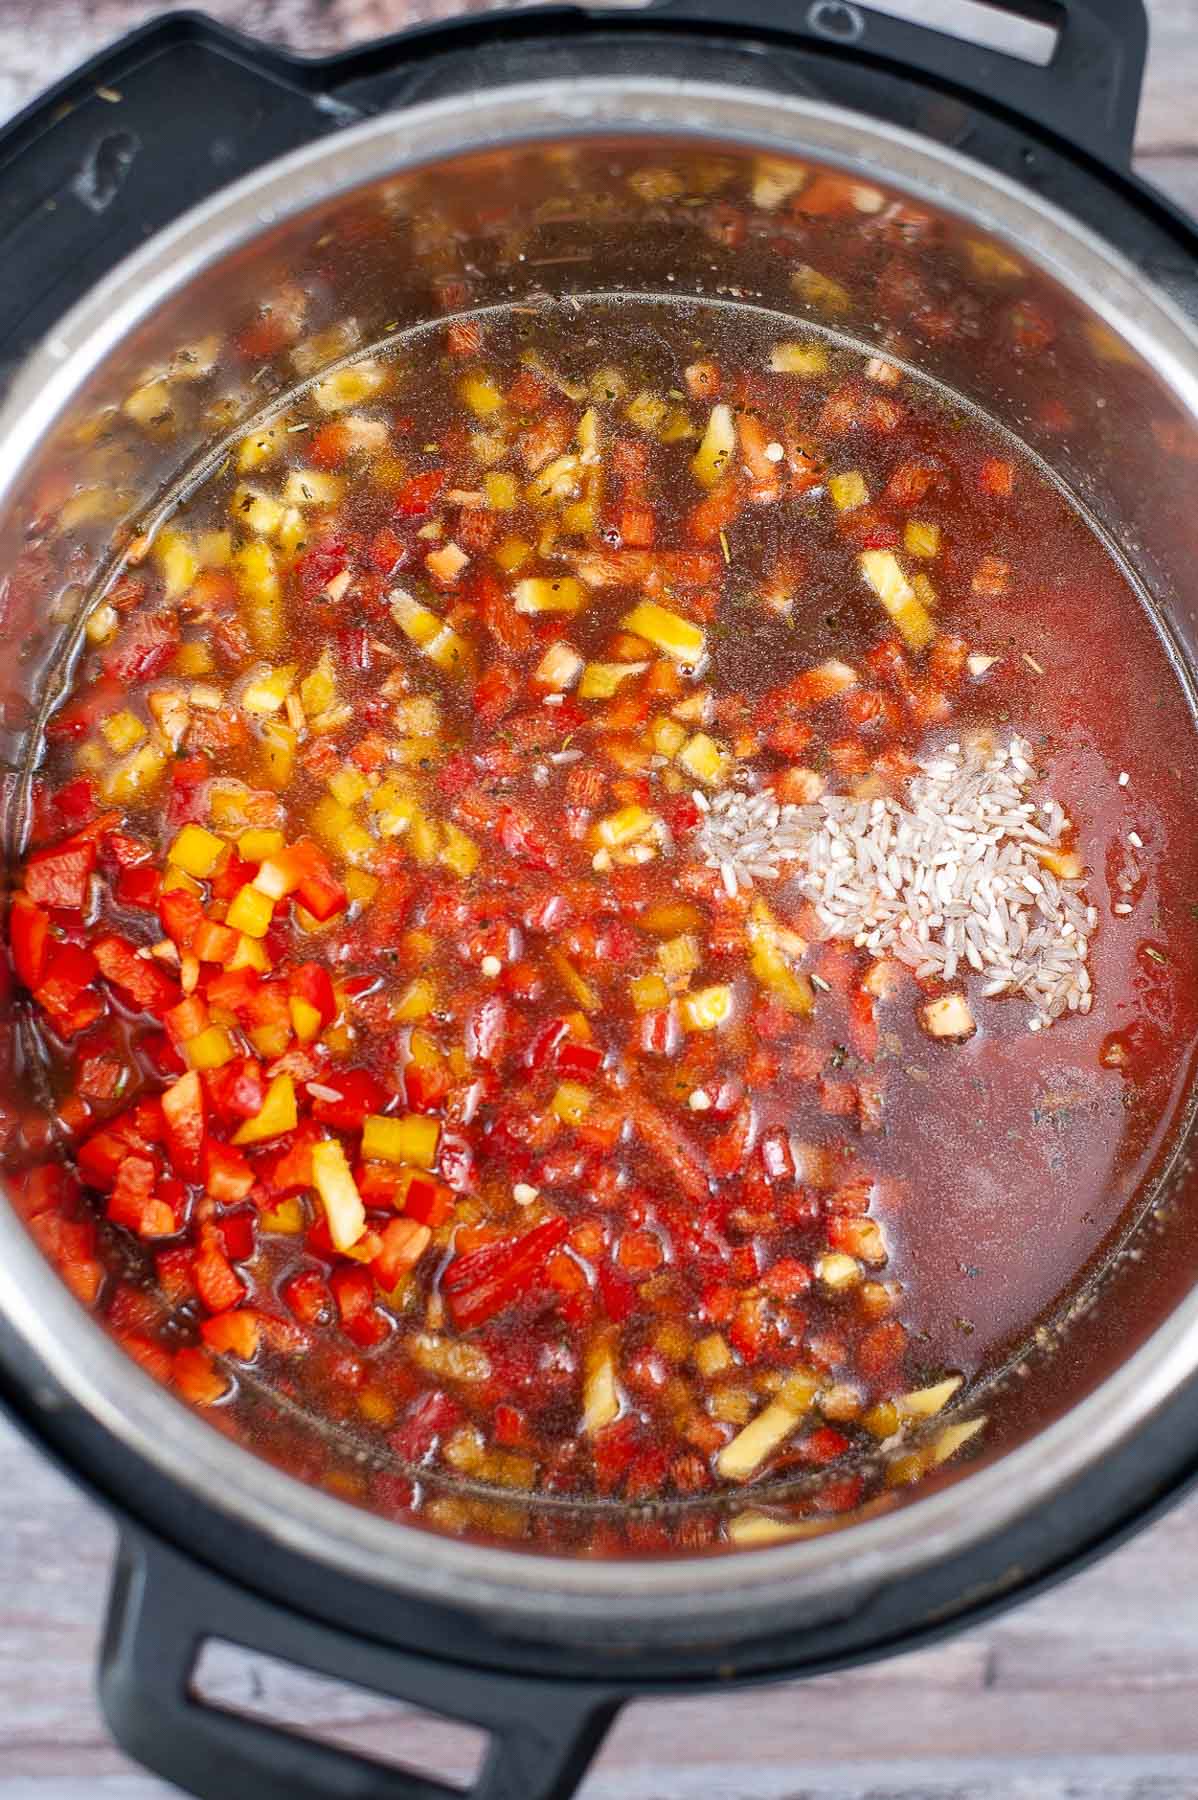 diced red peppers, broth, tomato sauce and rice in an instant pot